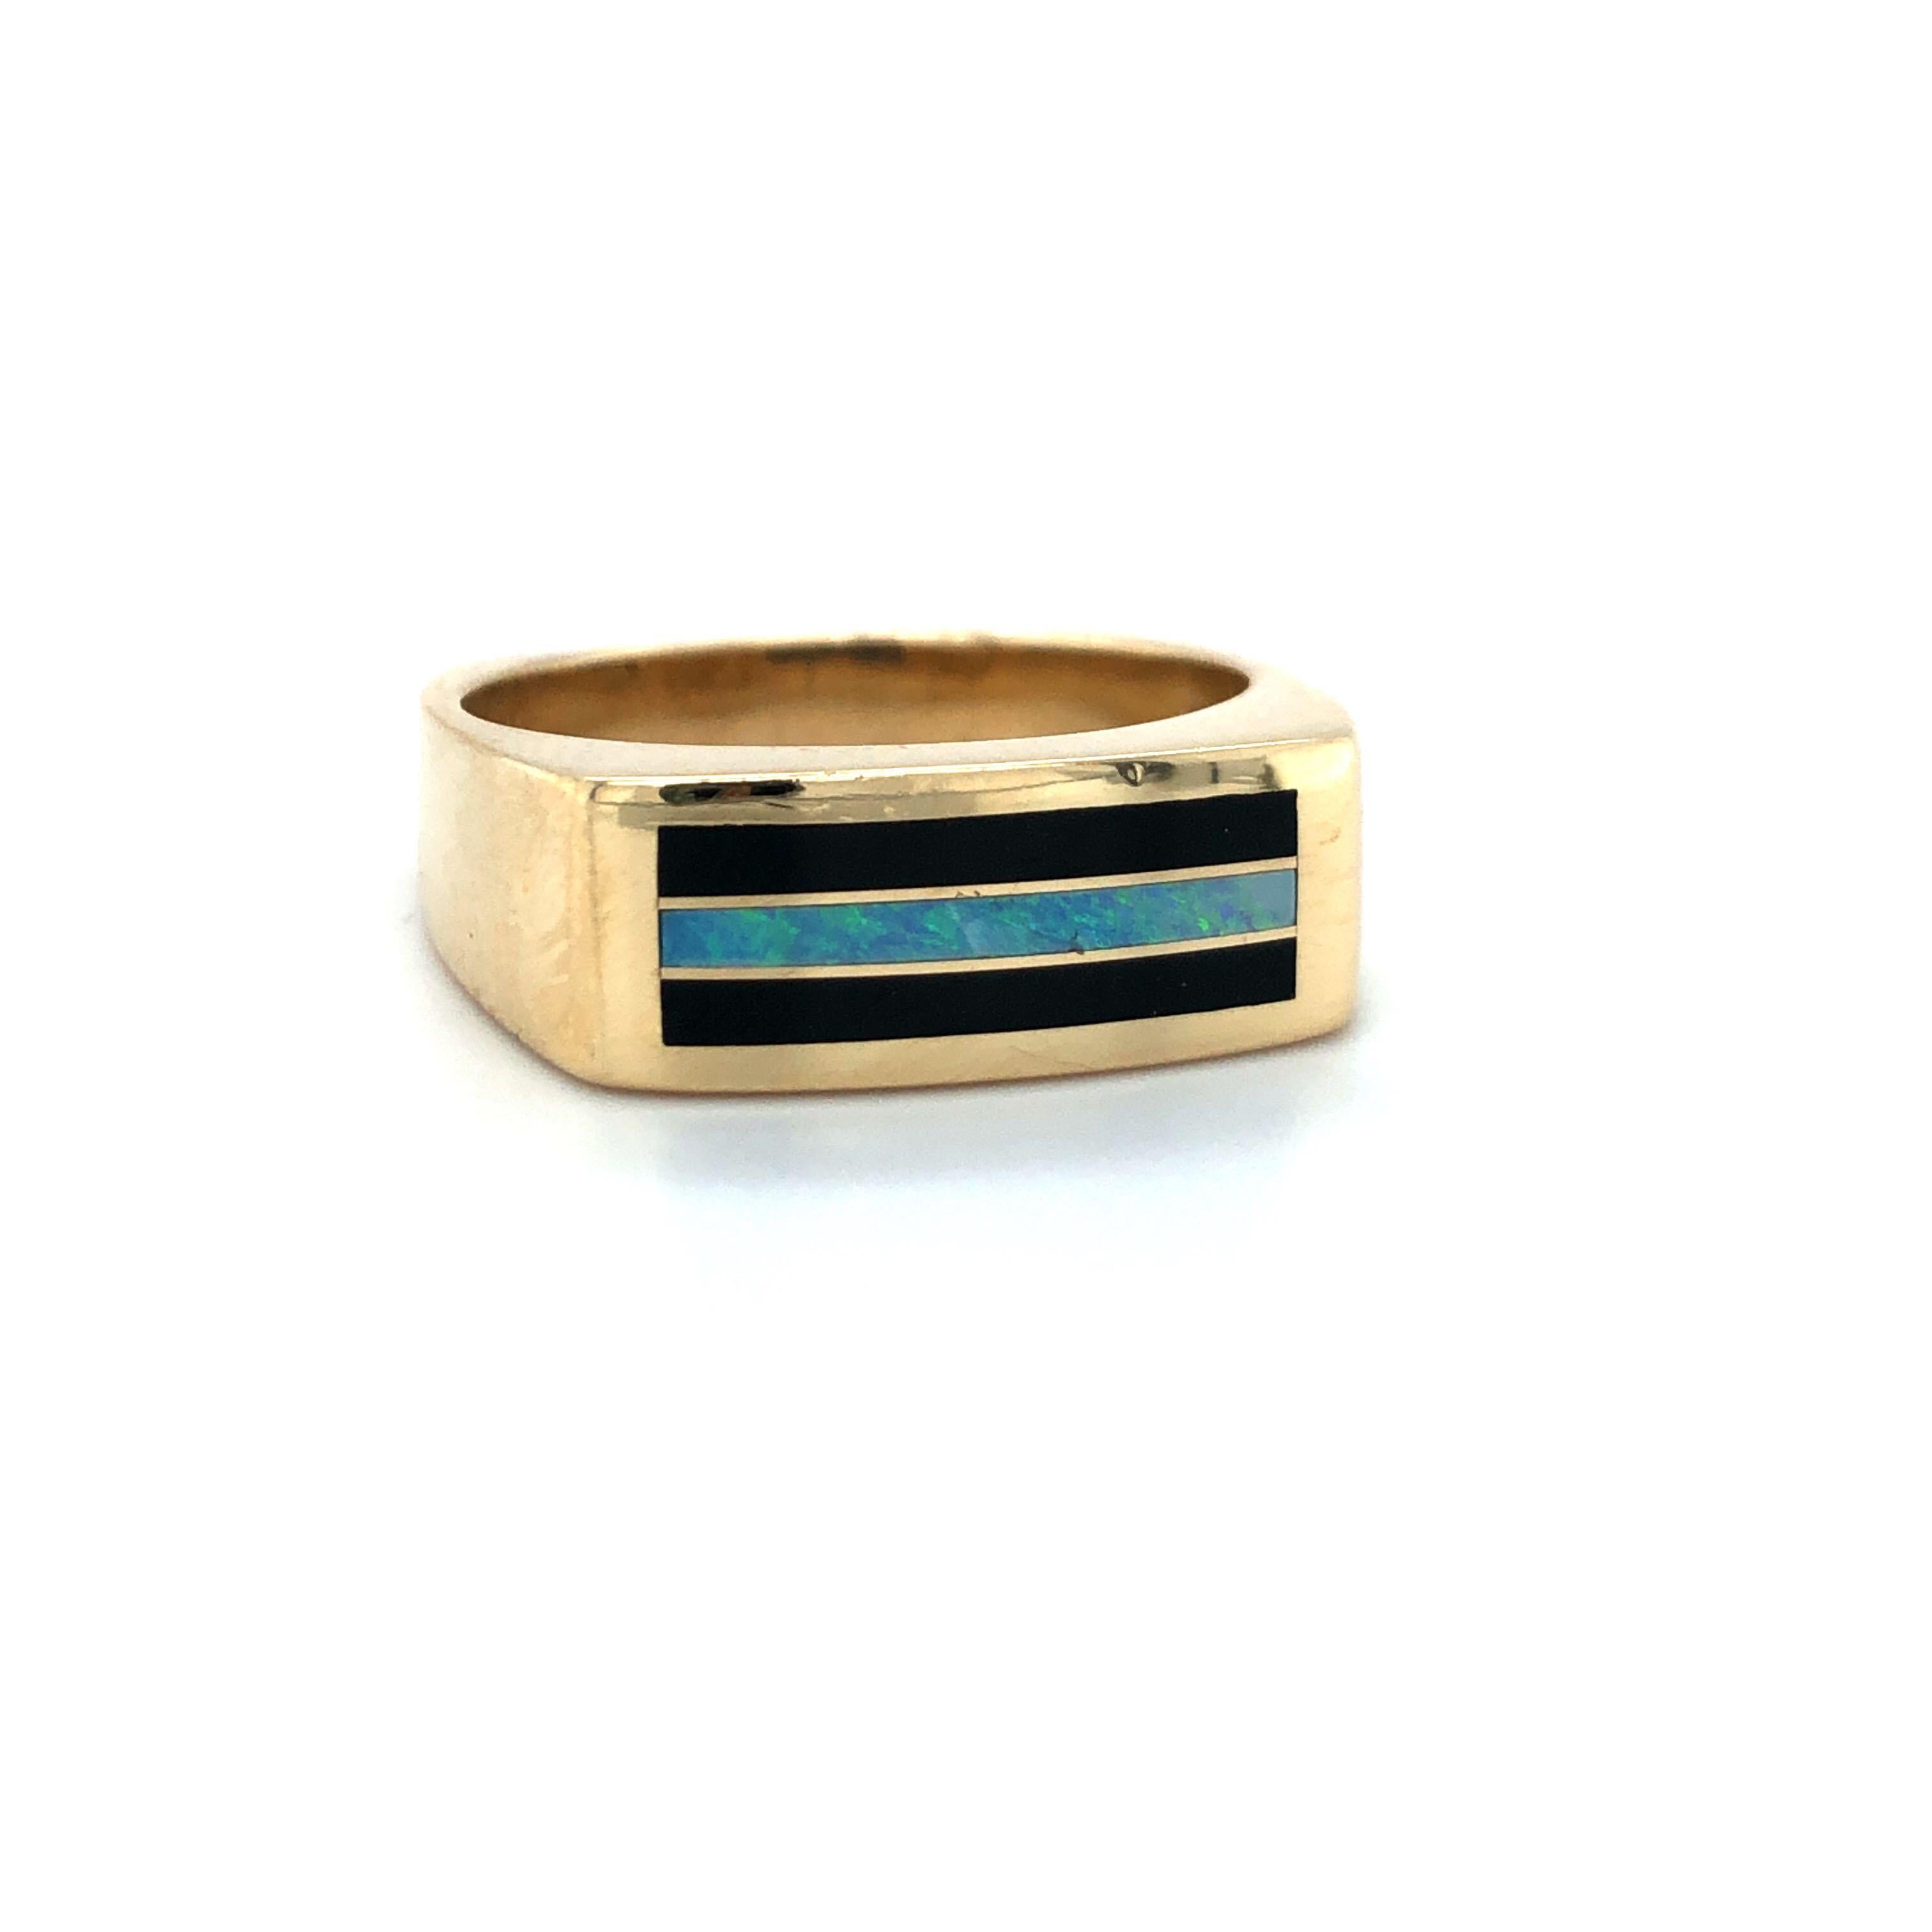 Men's 14k Yellow Gold Opal and Onyx Inlay Men's Squared Band Ring Size 10

Condition:  Good Condition
Metal:  14k Gold (Marked, and Professionally Tested)
Weight:  10g
Gemstones:  Inlaid Opal and Black Onyx
Markings:  